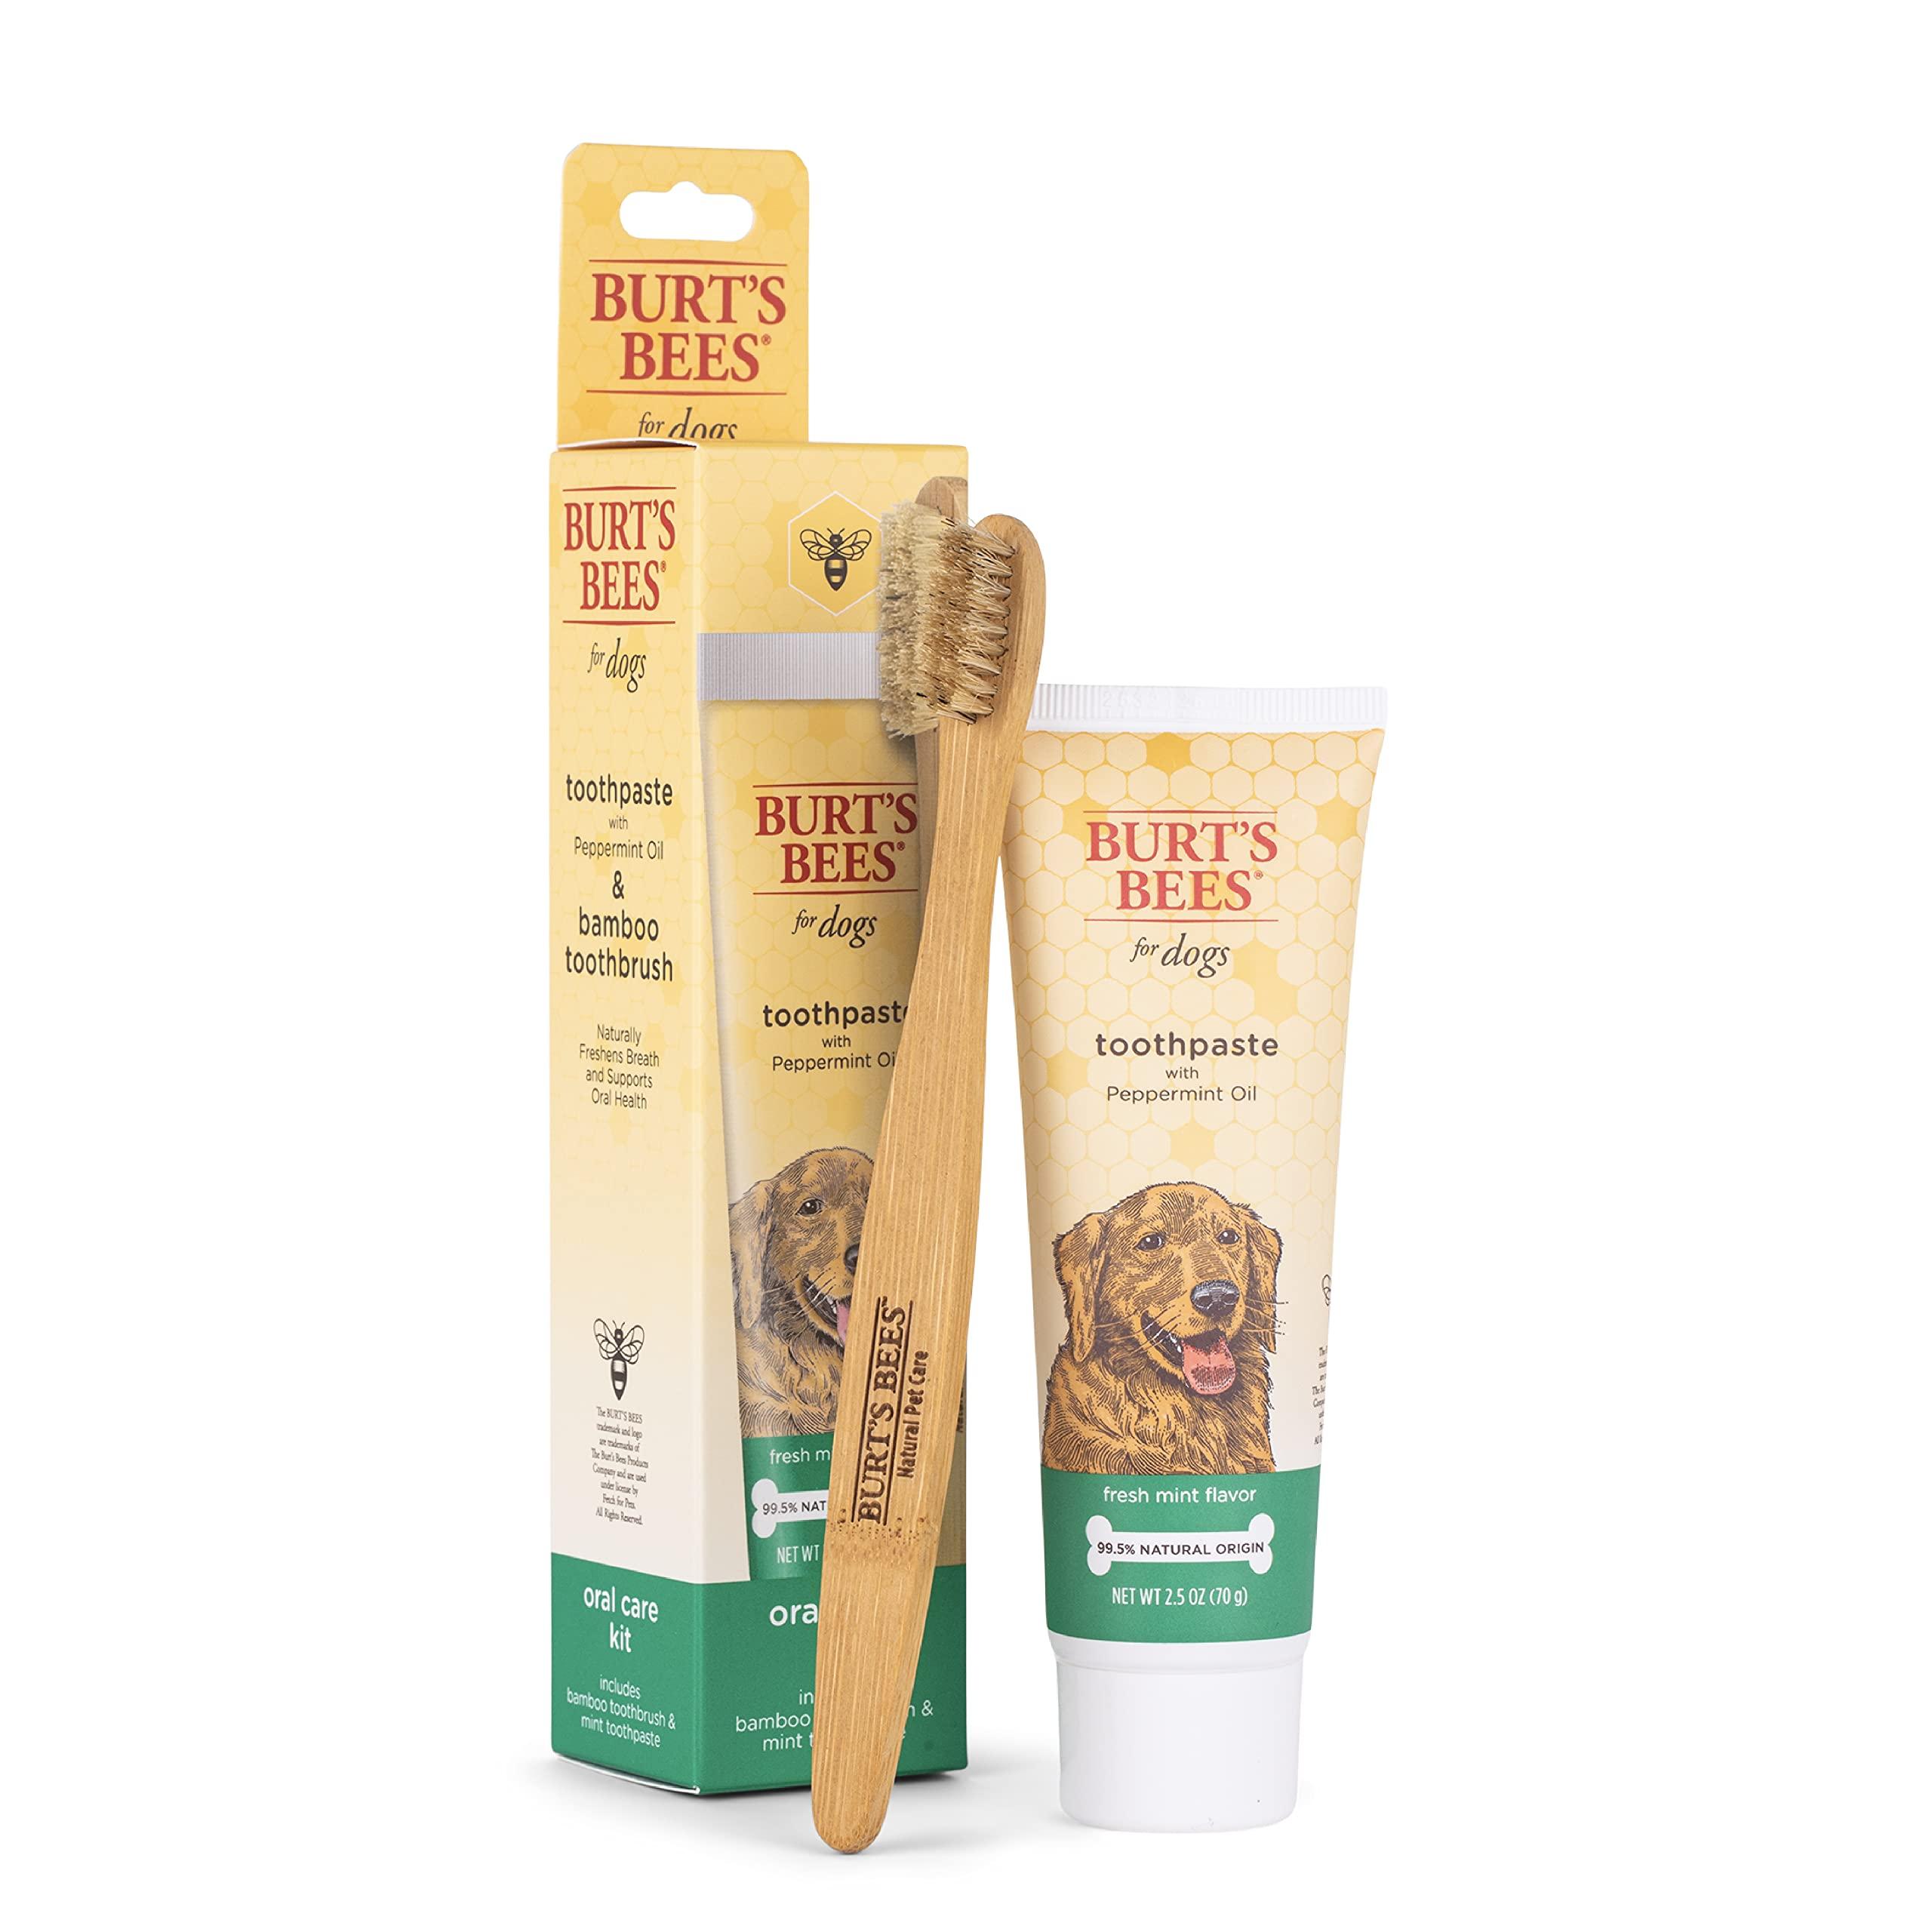 Burt's Bees for Dogs Natural Oral Care Kit | Dog Dental Kit with Toothpaste & Bamboo Toothbrush | Dog Toothbrush and Toothpaste with Honeysuckle & Peppermint Oil, Fresh Mint Flavor (2.5 oz)